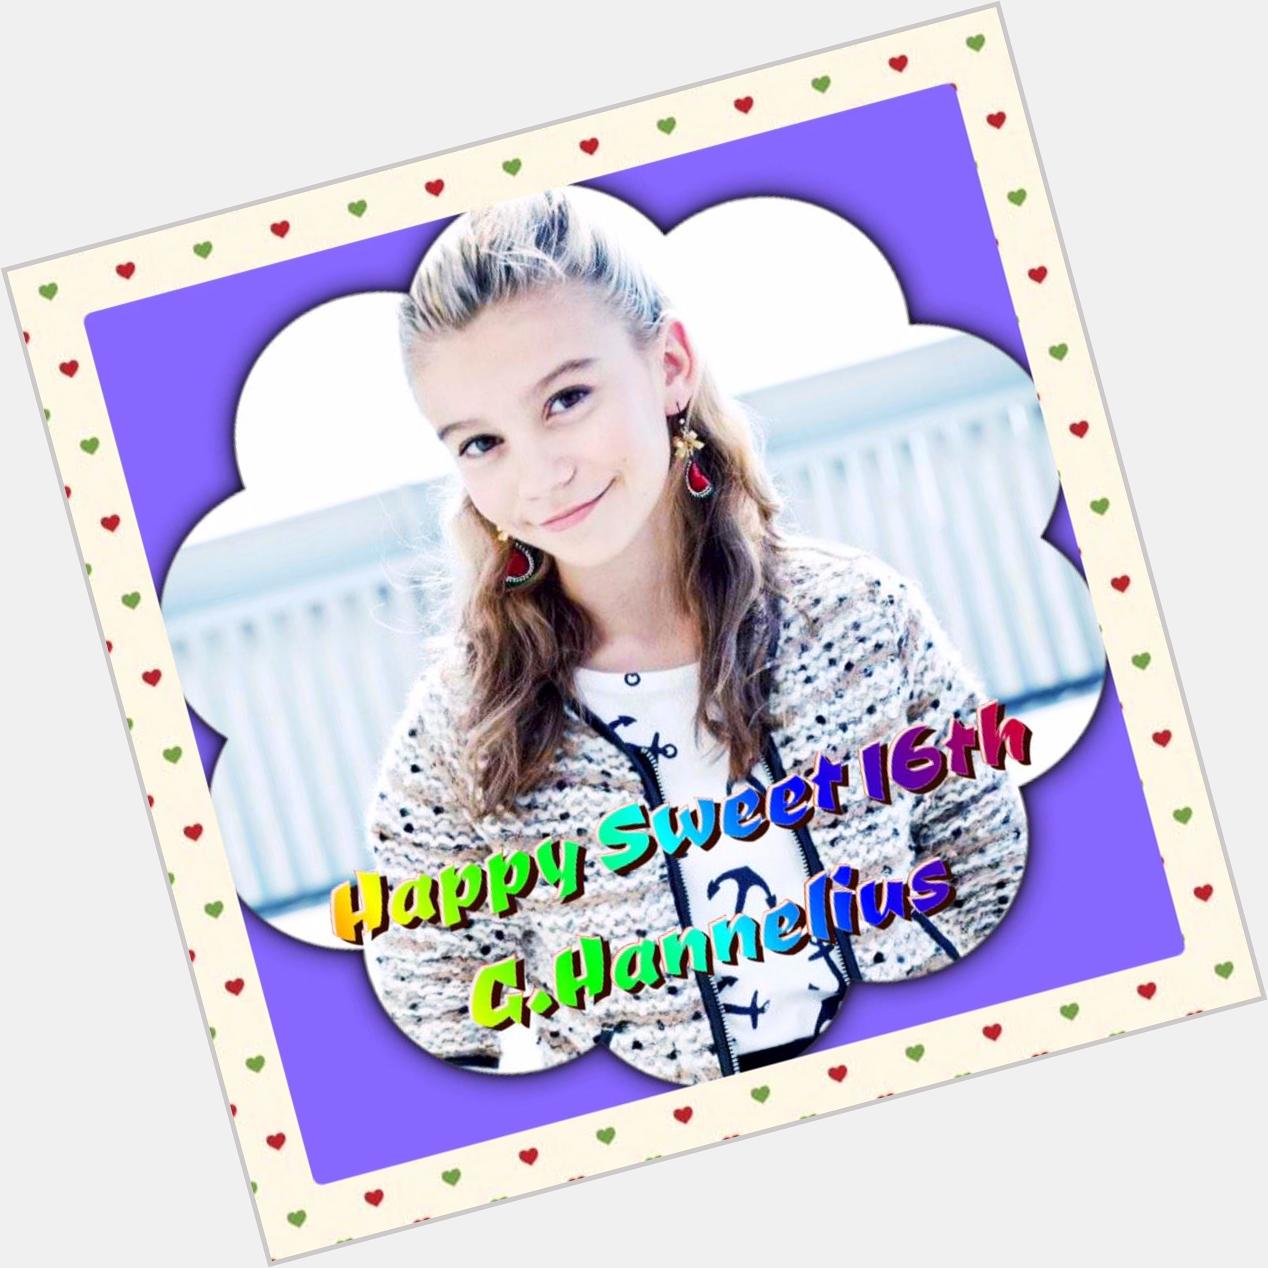  Happy Sweet 16 G have a great birthday hugs from NSW Australia I made this for you   